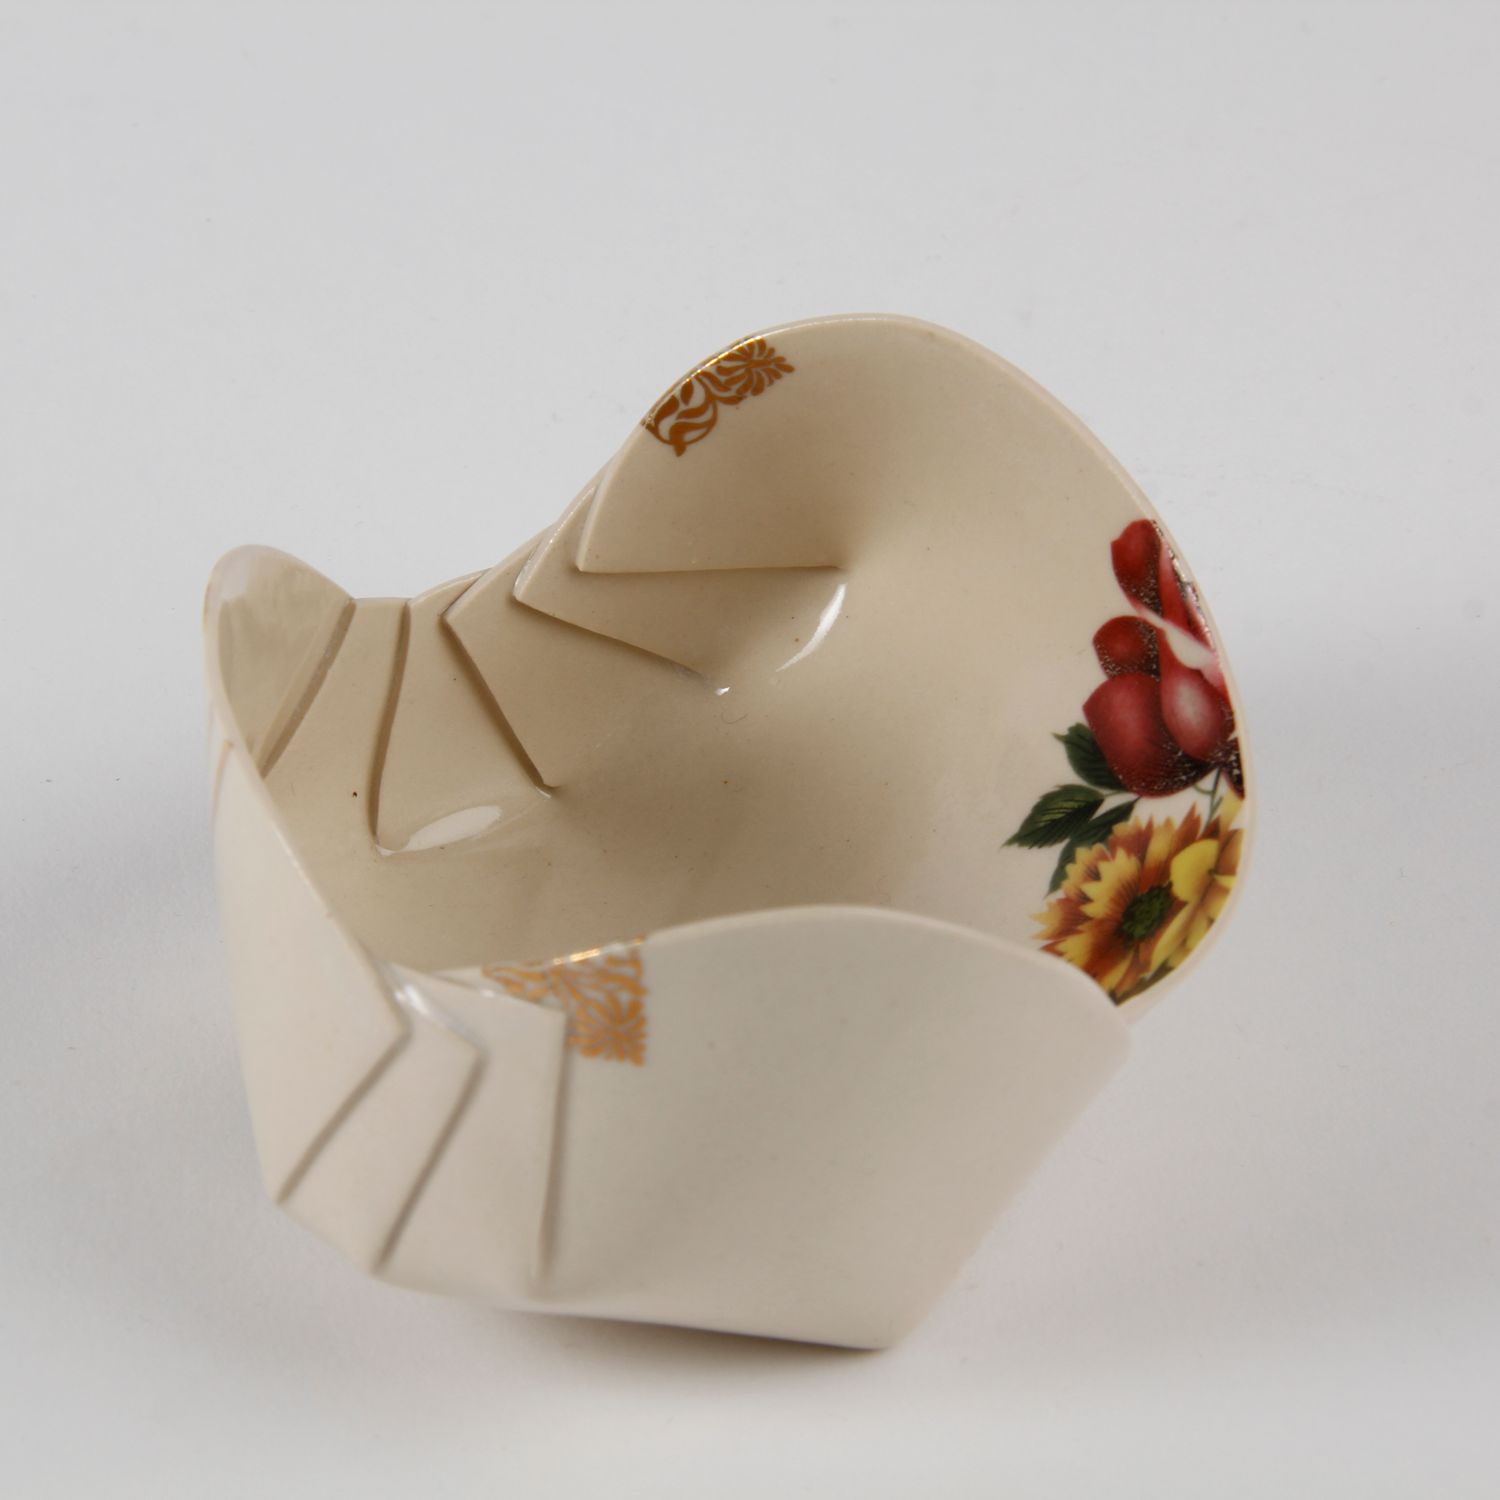 Natalie Waddell: X-Large Floral Bowl Product Image 7 of 7